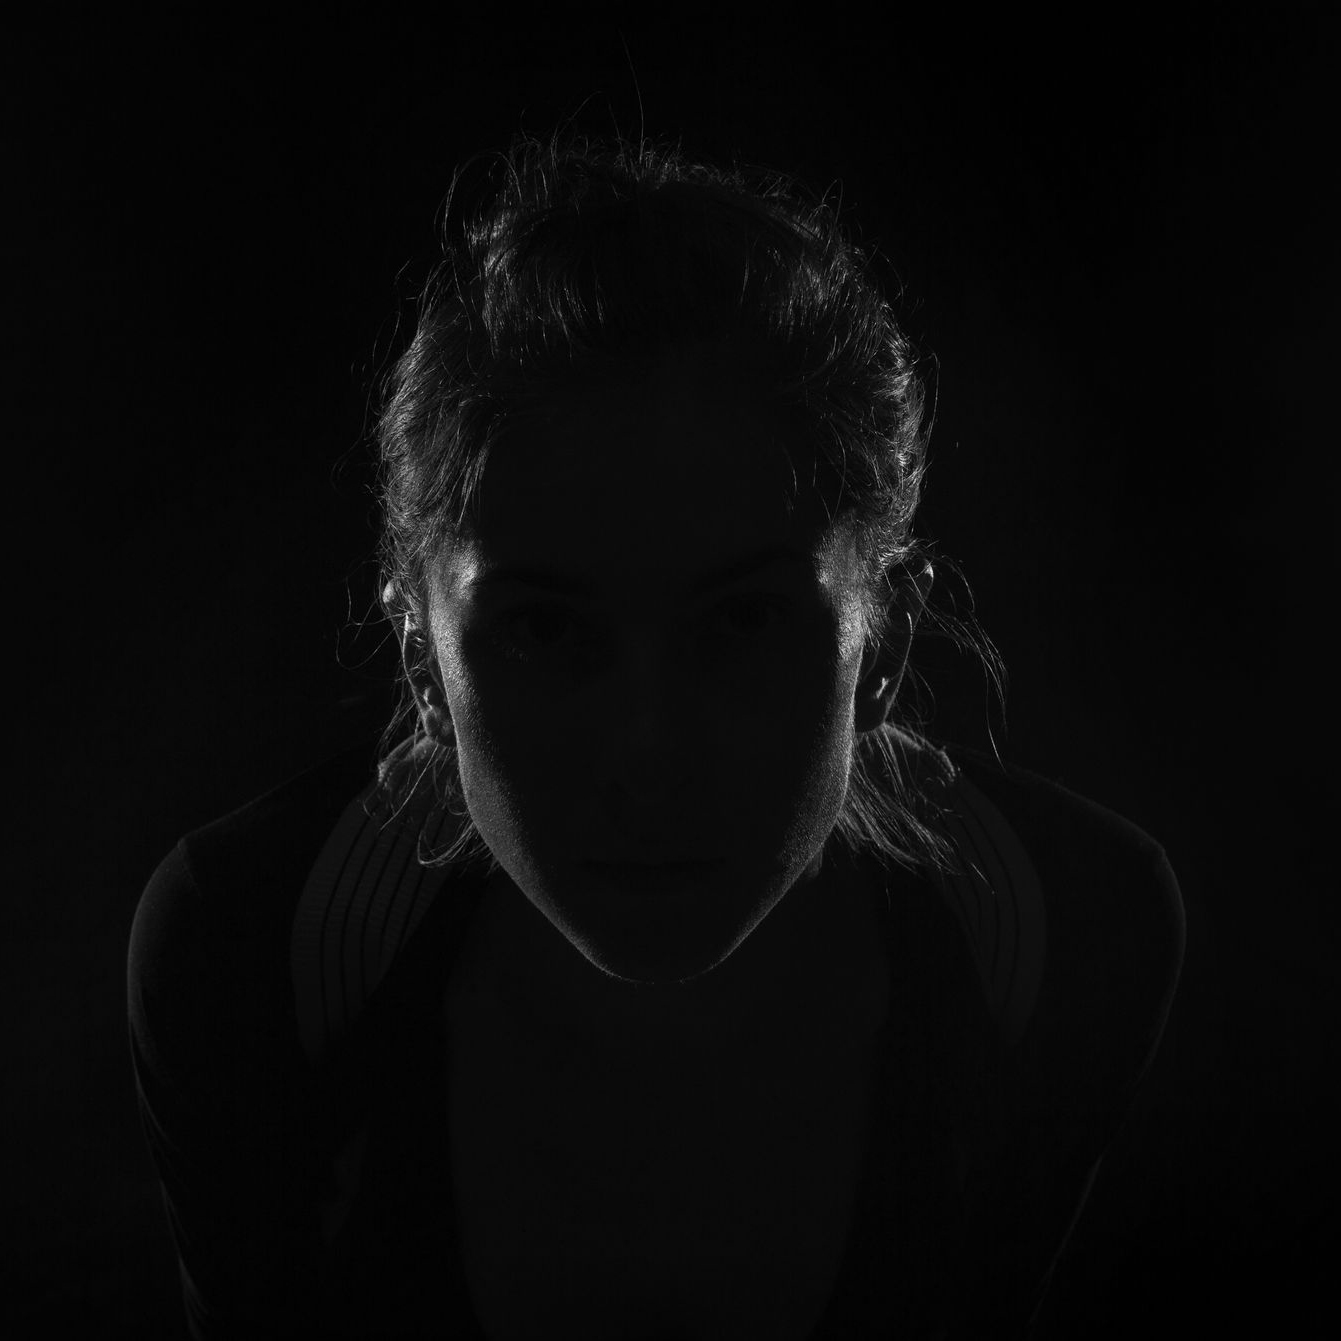 44147300 - hidden face in the shadow. female silhouette. ⋆ Mind Power